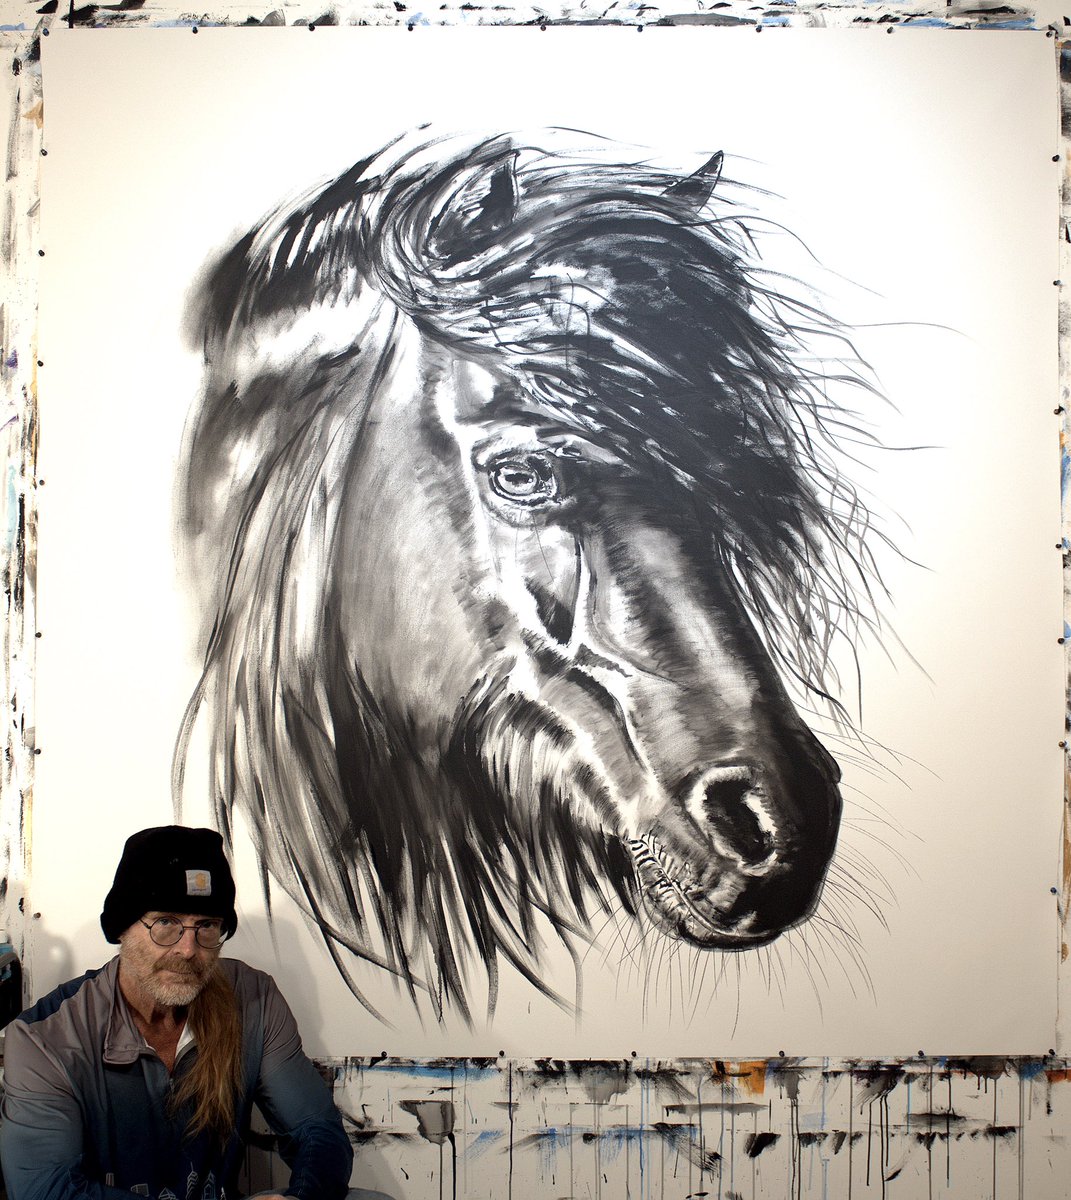 “Black Pony” 73 x 72 inch ink and acrylic on canvas.
Available on my website.
 #drawing #drawings  #ink #inked #painting #paintings #horses #equestrian #horseart #equineart #horse #equine #art #artist #artwork #artistsoninstagram #contemporaryart #animals #acrylic #inkedart…